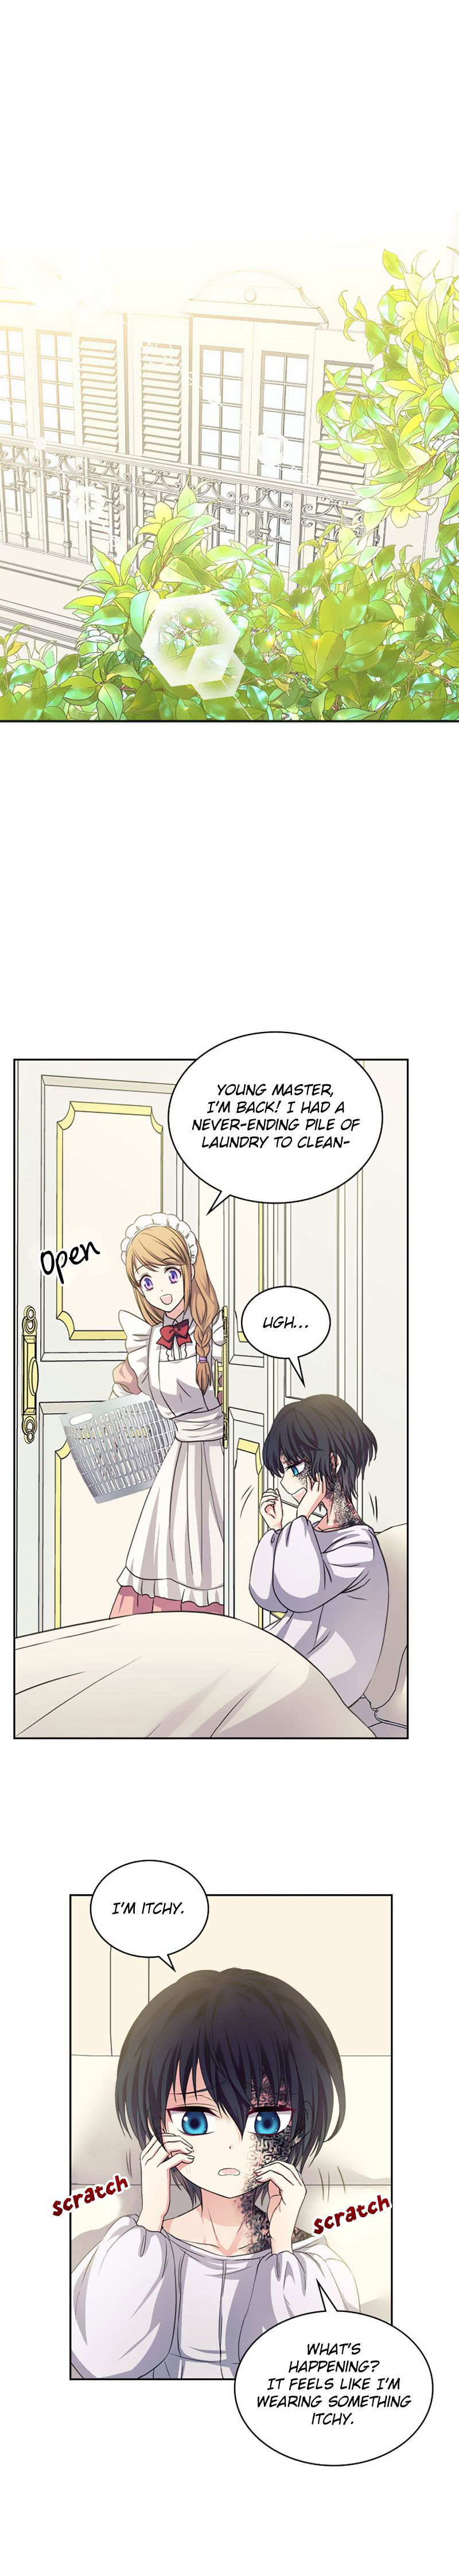 Sincerely: I Became a Duke's Maid Chapter 17 page 4